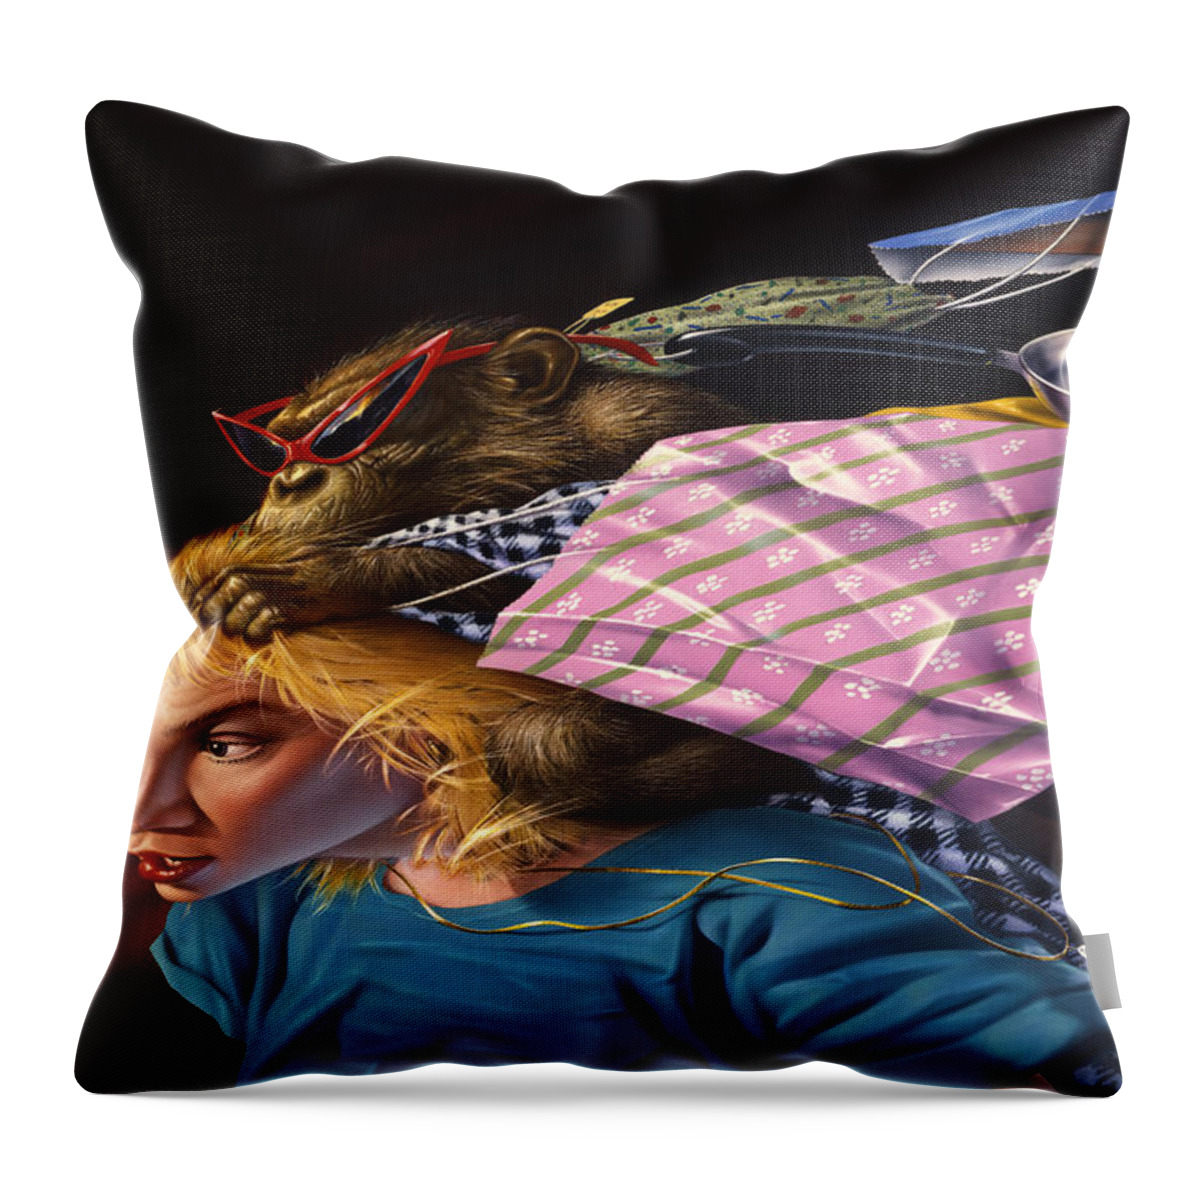 Monkey Throw Pillow featuring the painting The Shopping Monkey by Mark Fredrickson